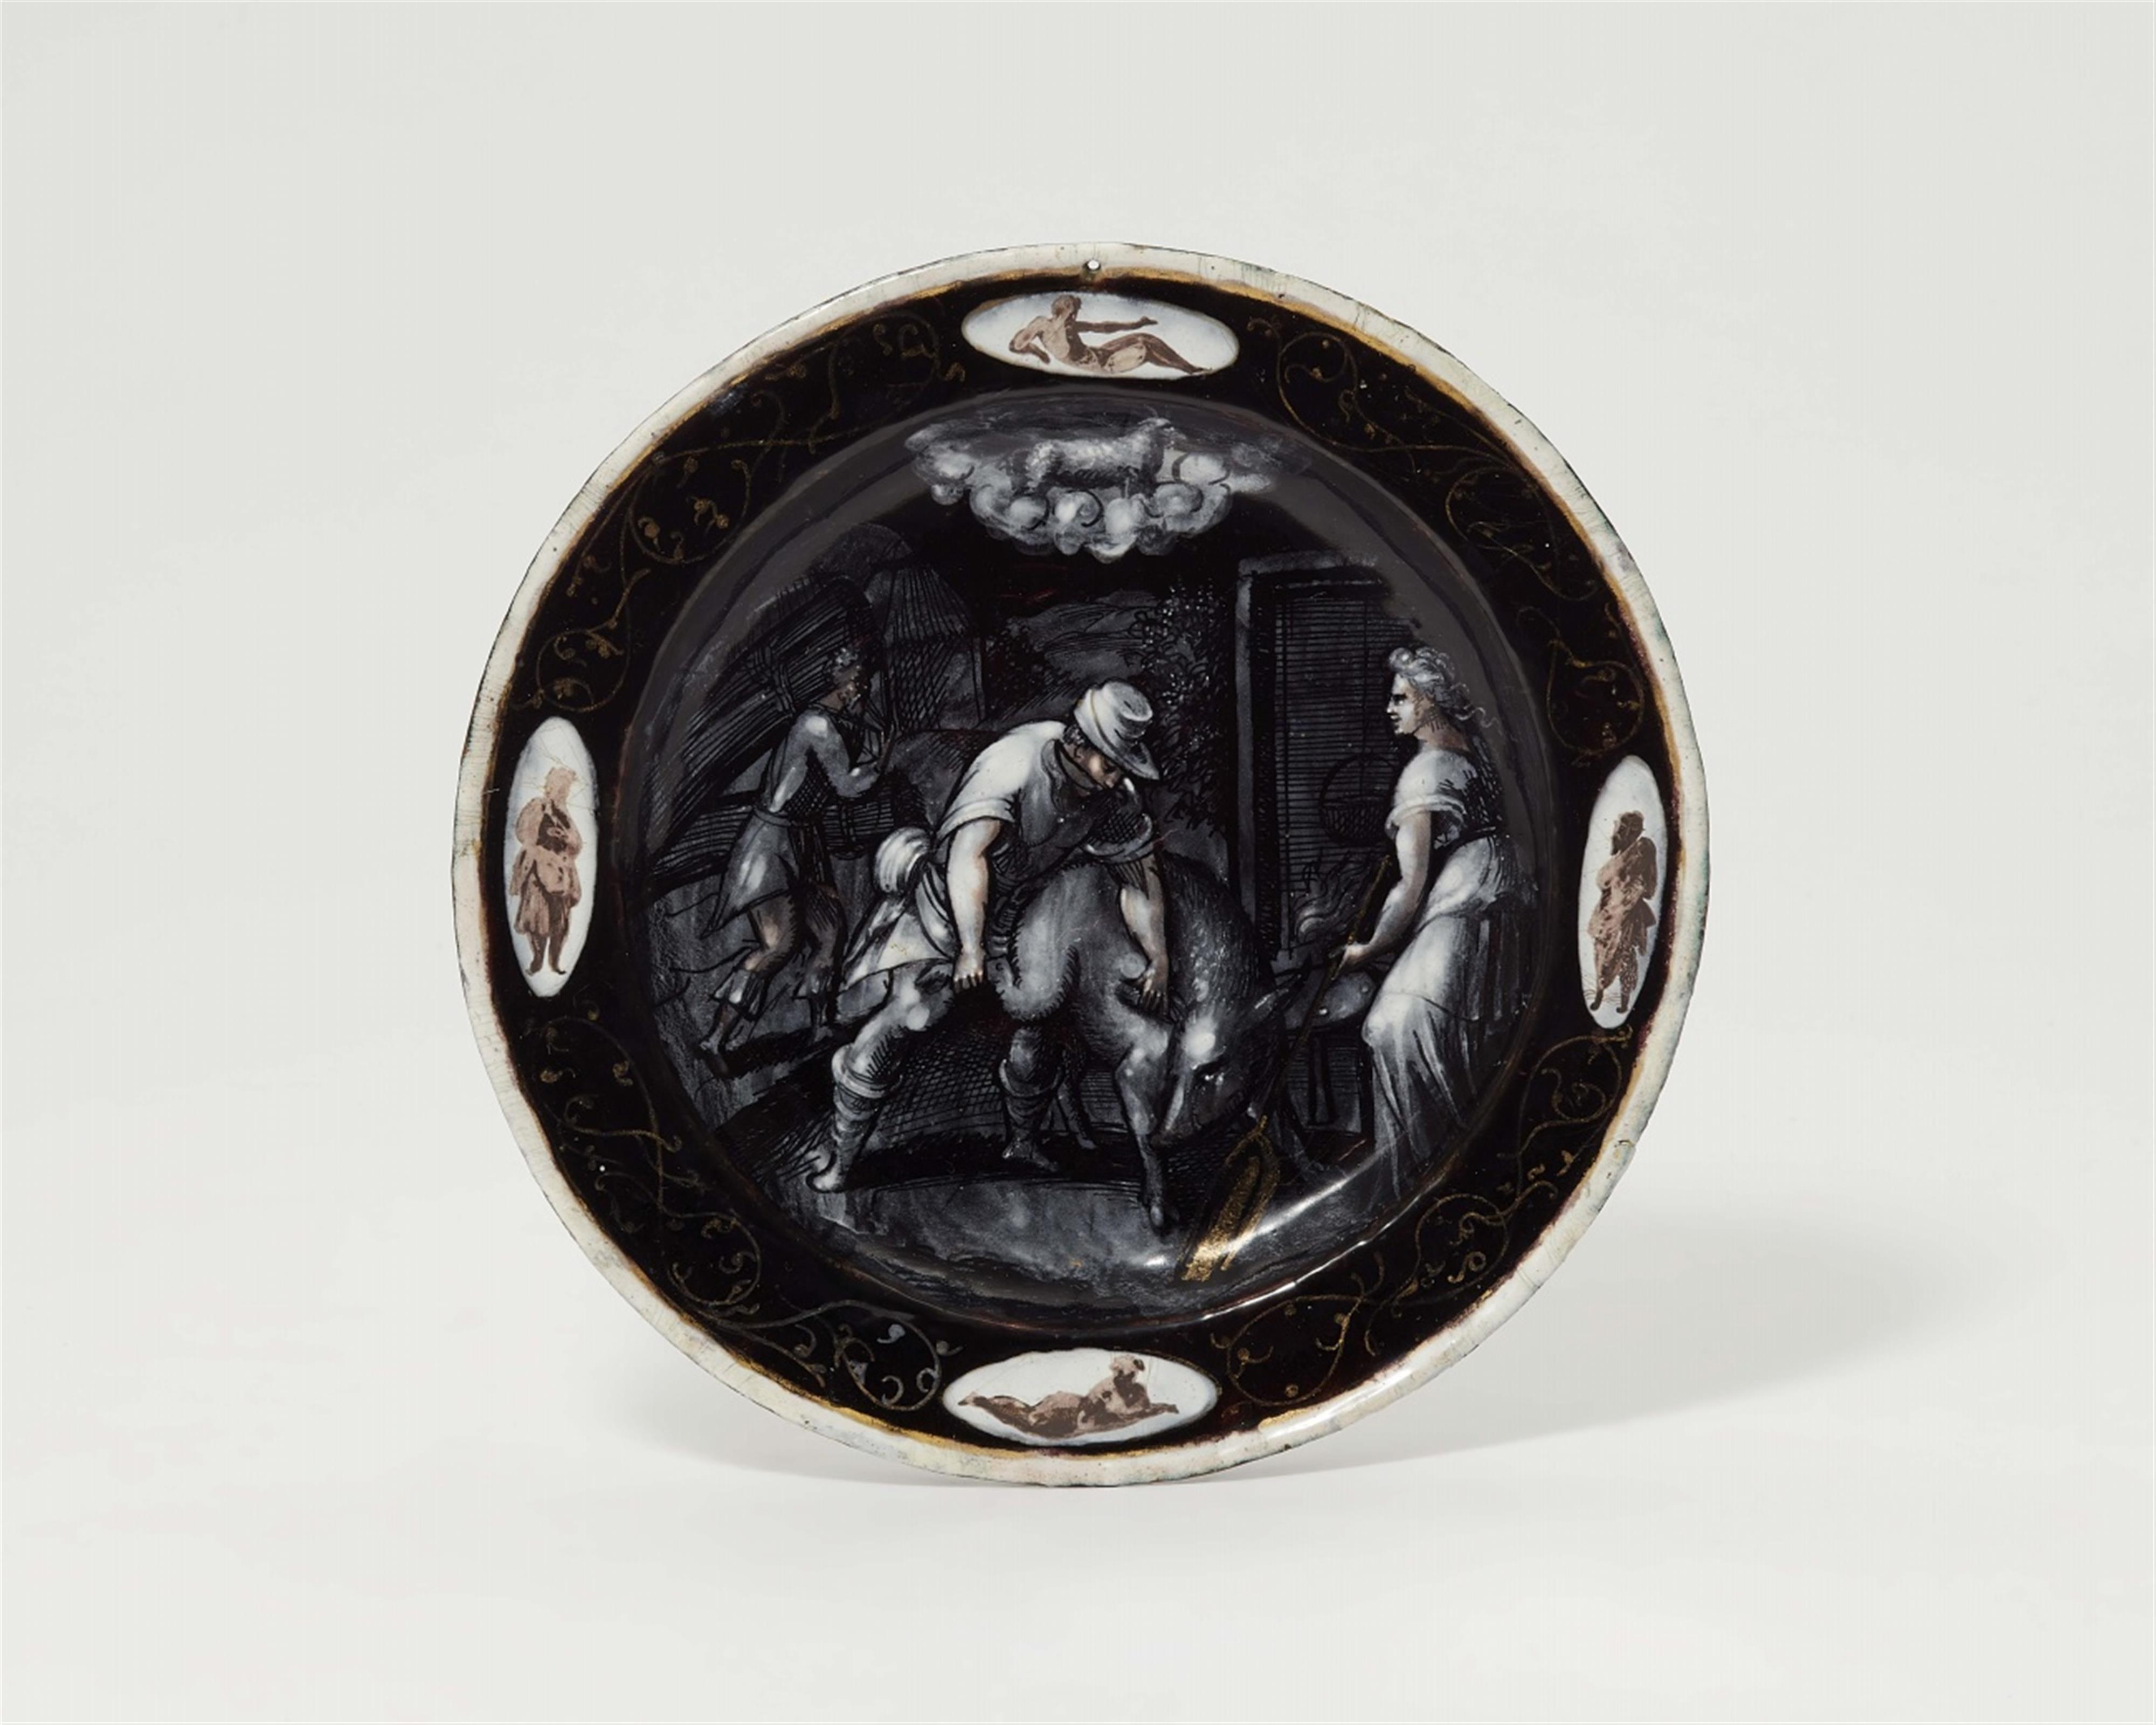 A Limoges enamel astrological plate with Capricorn - image-1